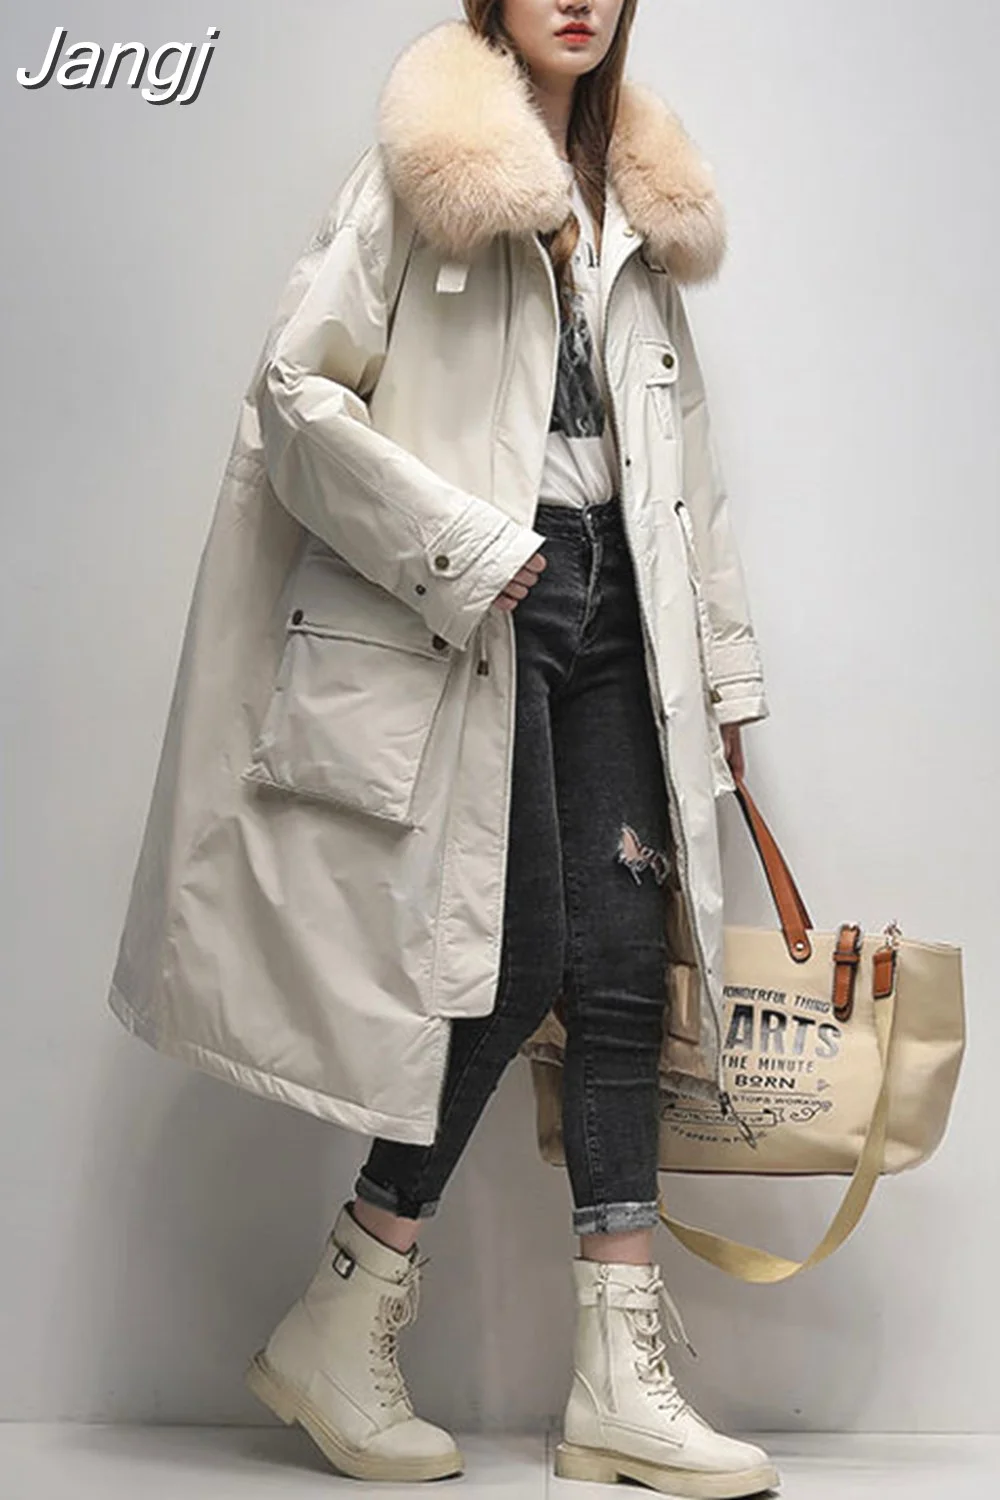 Jangj Winter 90% White Duck Down Coat Real Fur Hooded Jacket Casual Big Pocket Thick Parkas Loose Jackets Windproof Snow Outwear